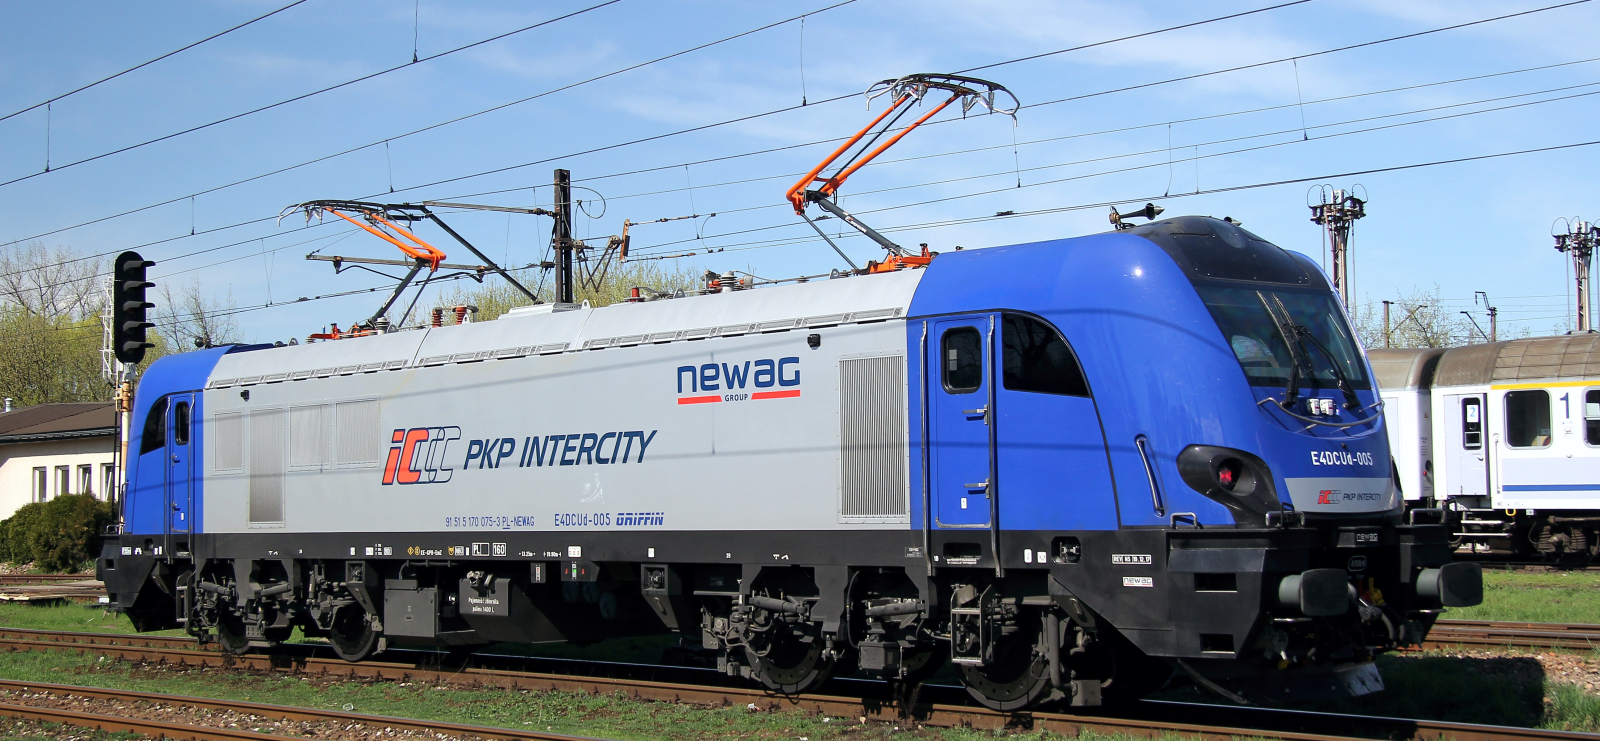 PKP Intercity E4DCUd-005 has a top speed of 160 km/h and is designed to operate under 3 kV DC